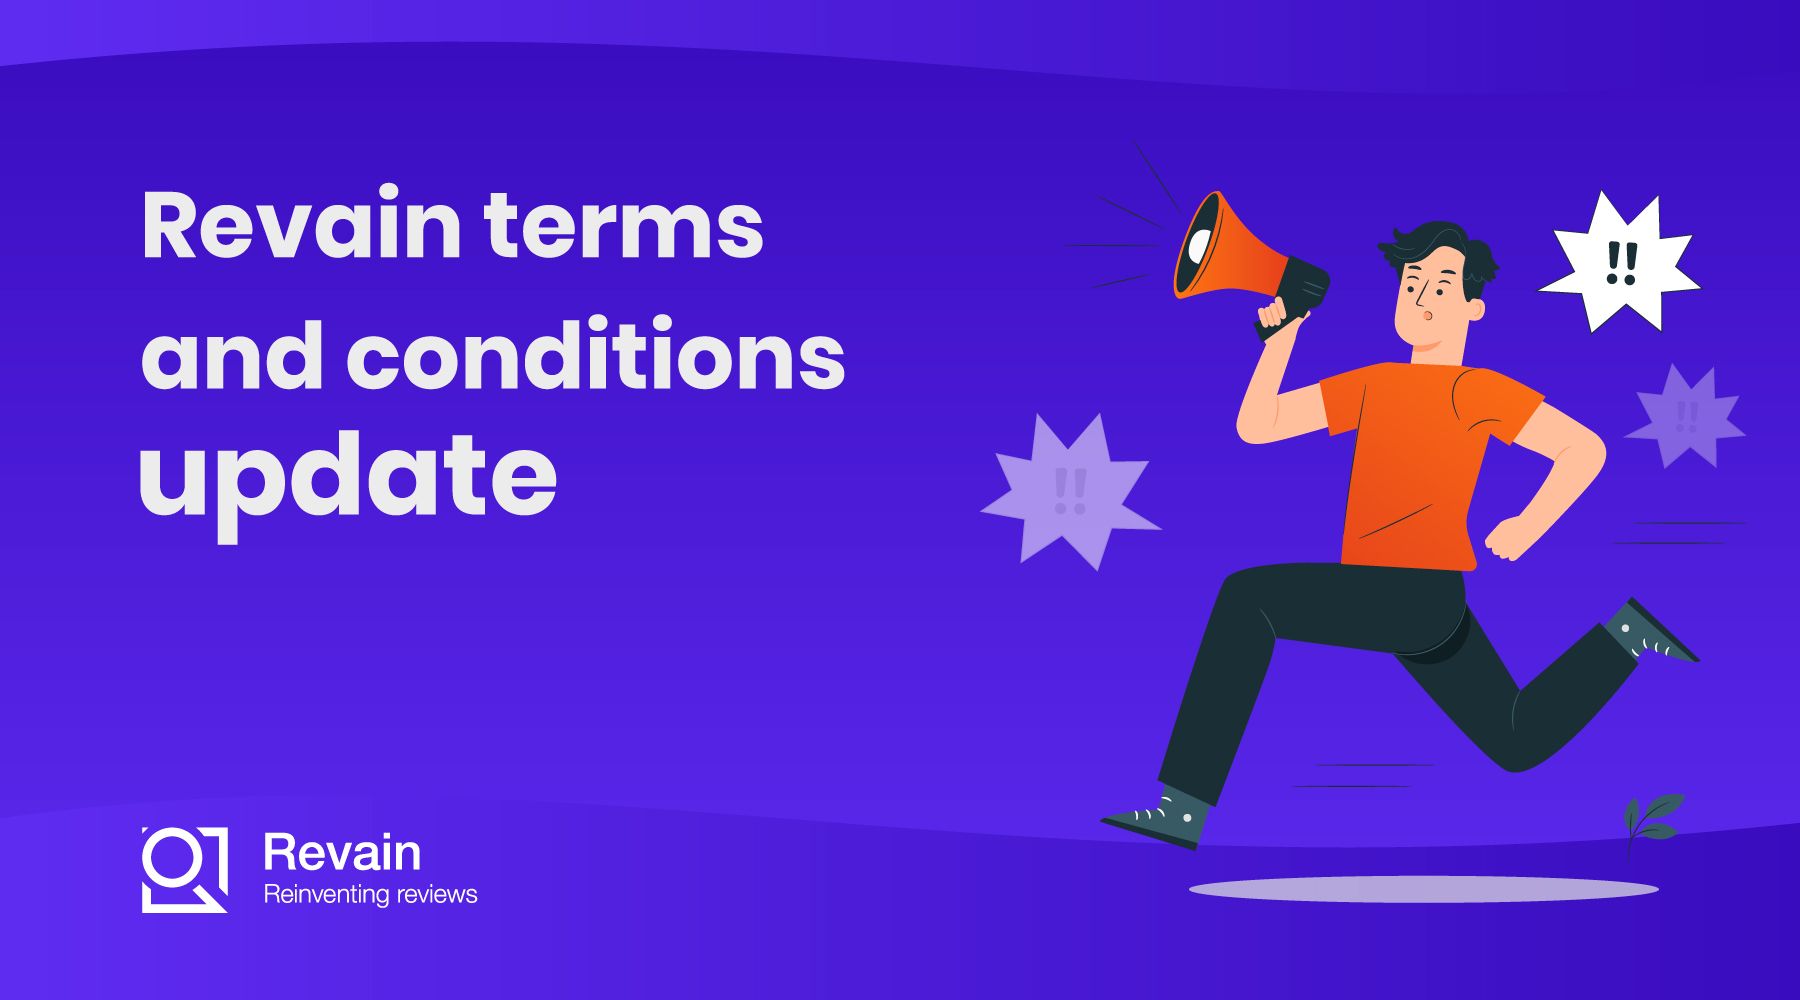 Article Revain terms and conditions update.